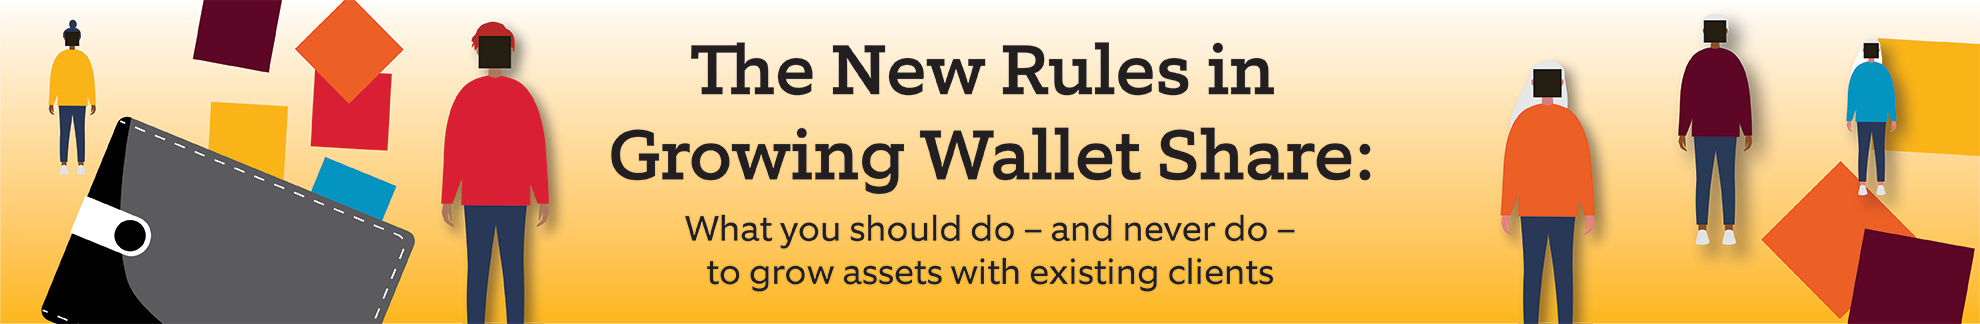 The New Rules in Growing Wallet Share: What You Should Do – and Never Do – To Grow Assets With Existing Clients